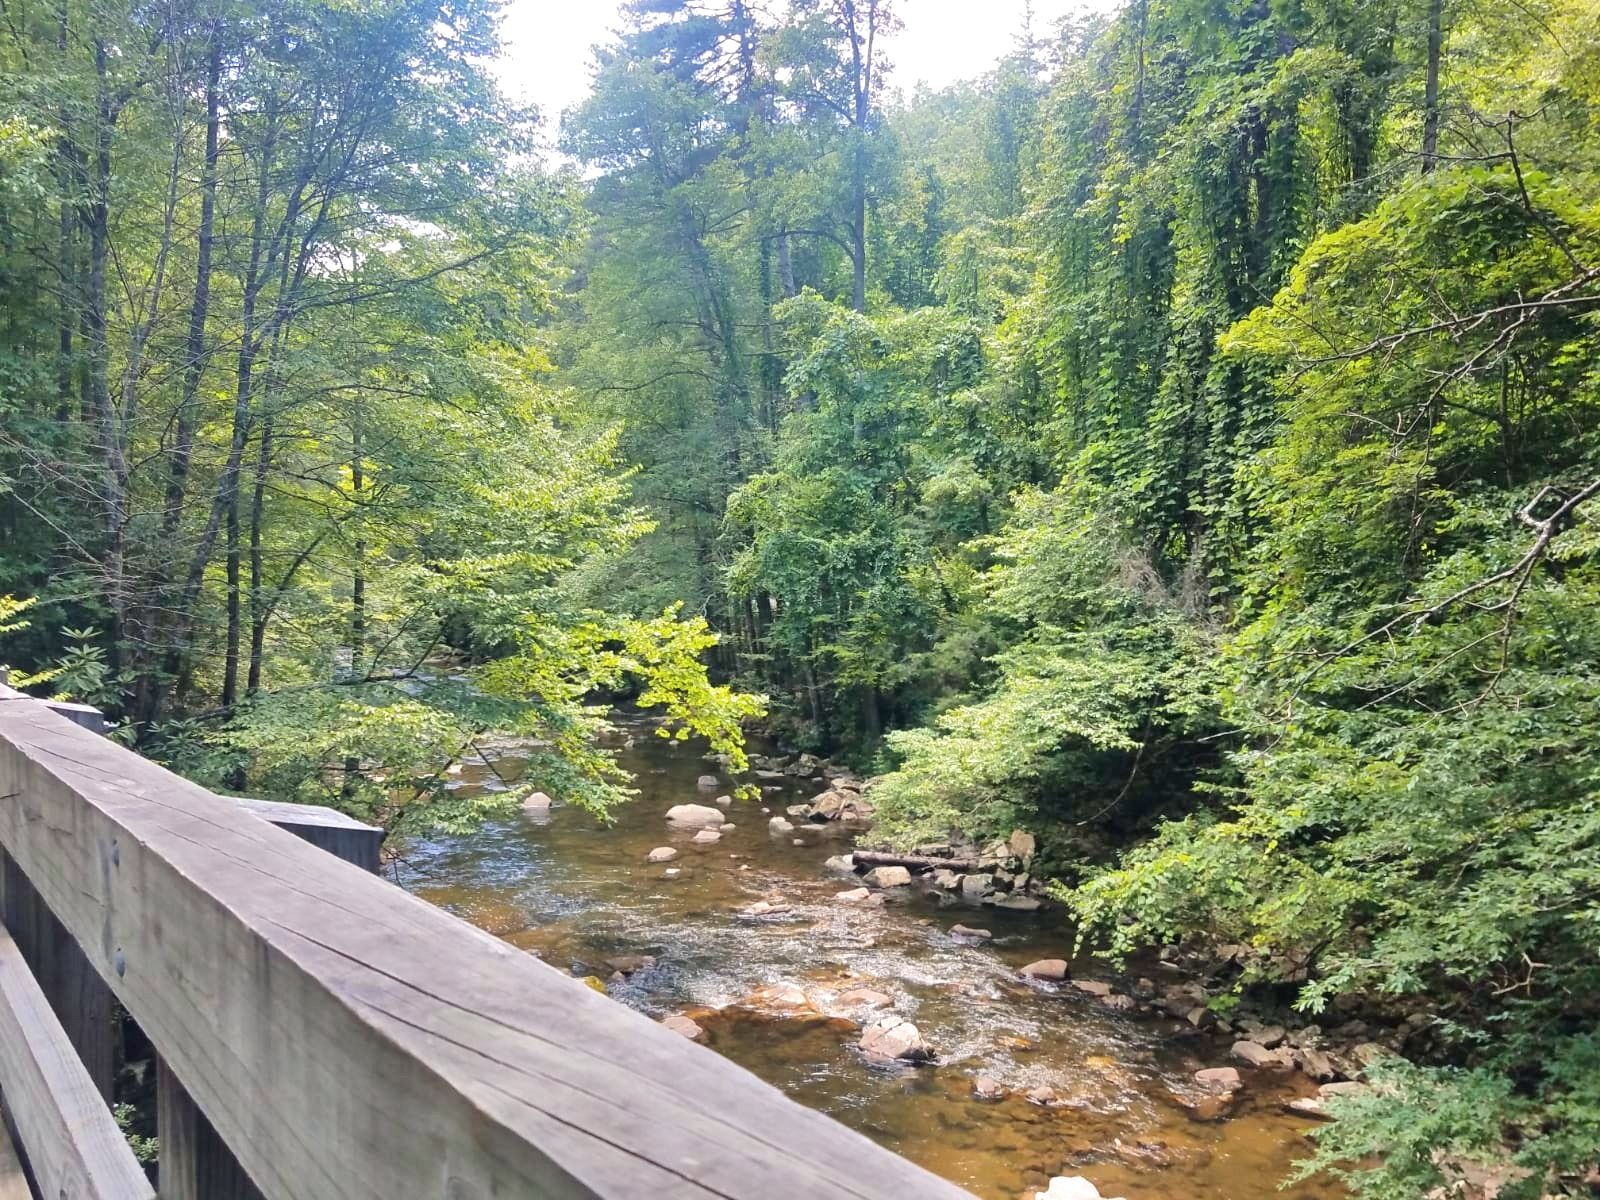 Tips for a Family Trip on the Virginia Creeper Trail